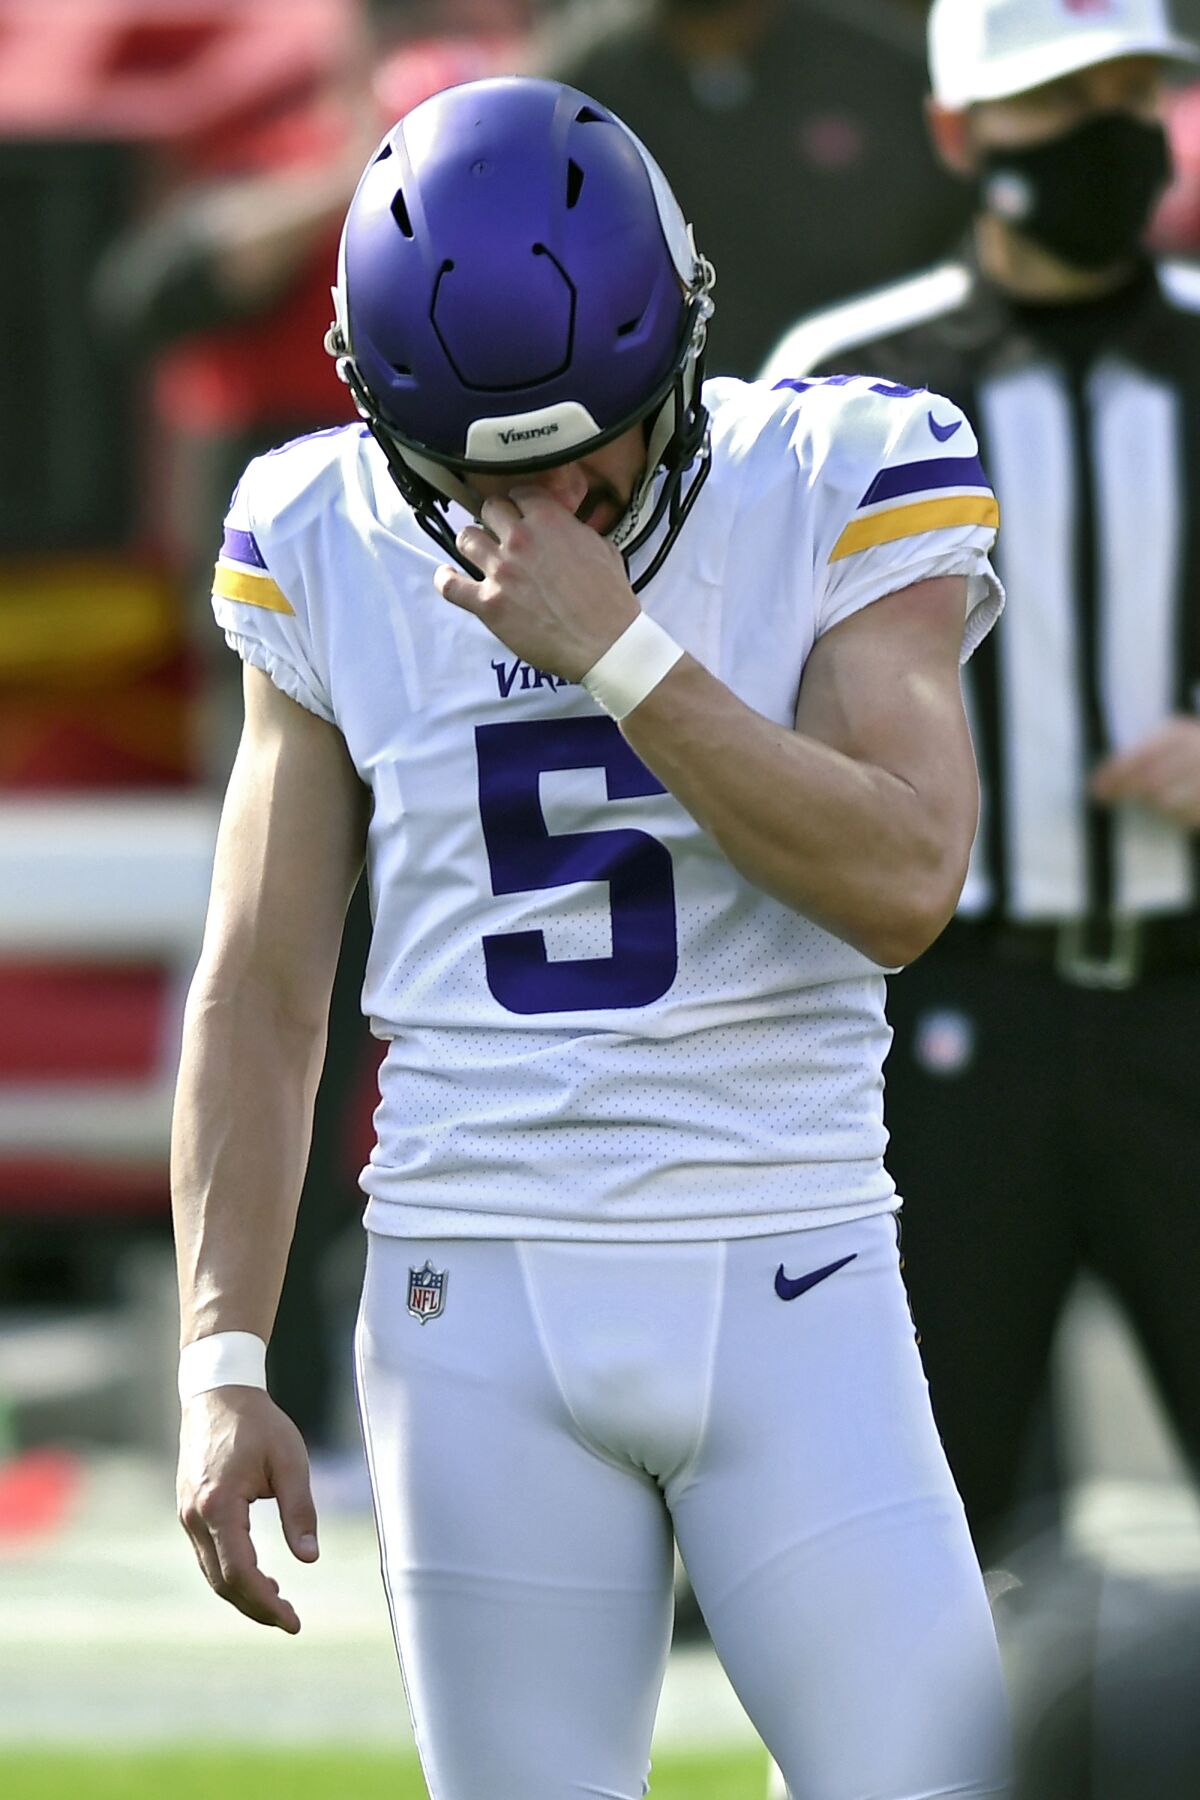 Minnesota Vikings' Dan Bailey (5) reacts after missing a field goal against the Tampa Bay Buccaneers during the first half of an NFL football game Sunday, Dec. 13, 2020, in Tampa, Fla. (AP Photo/Jason Behnken)